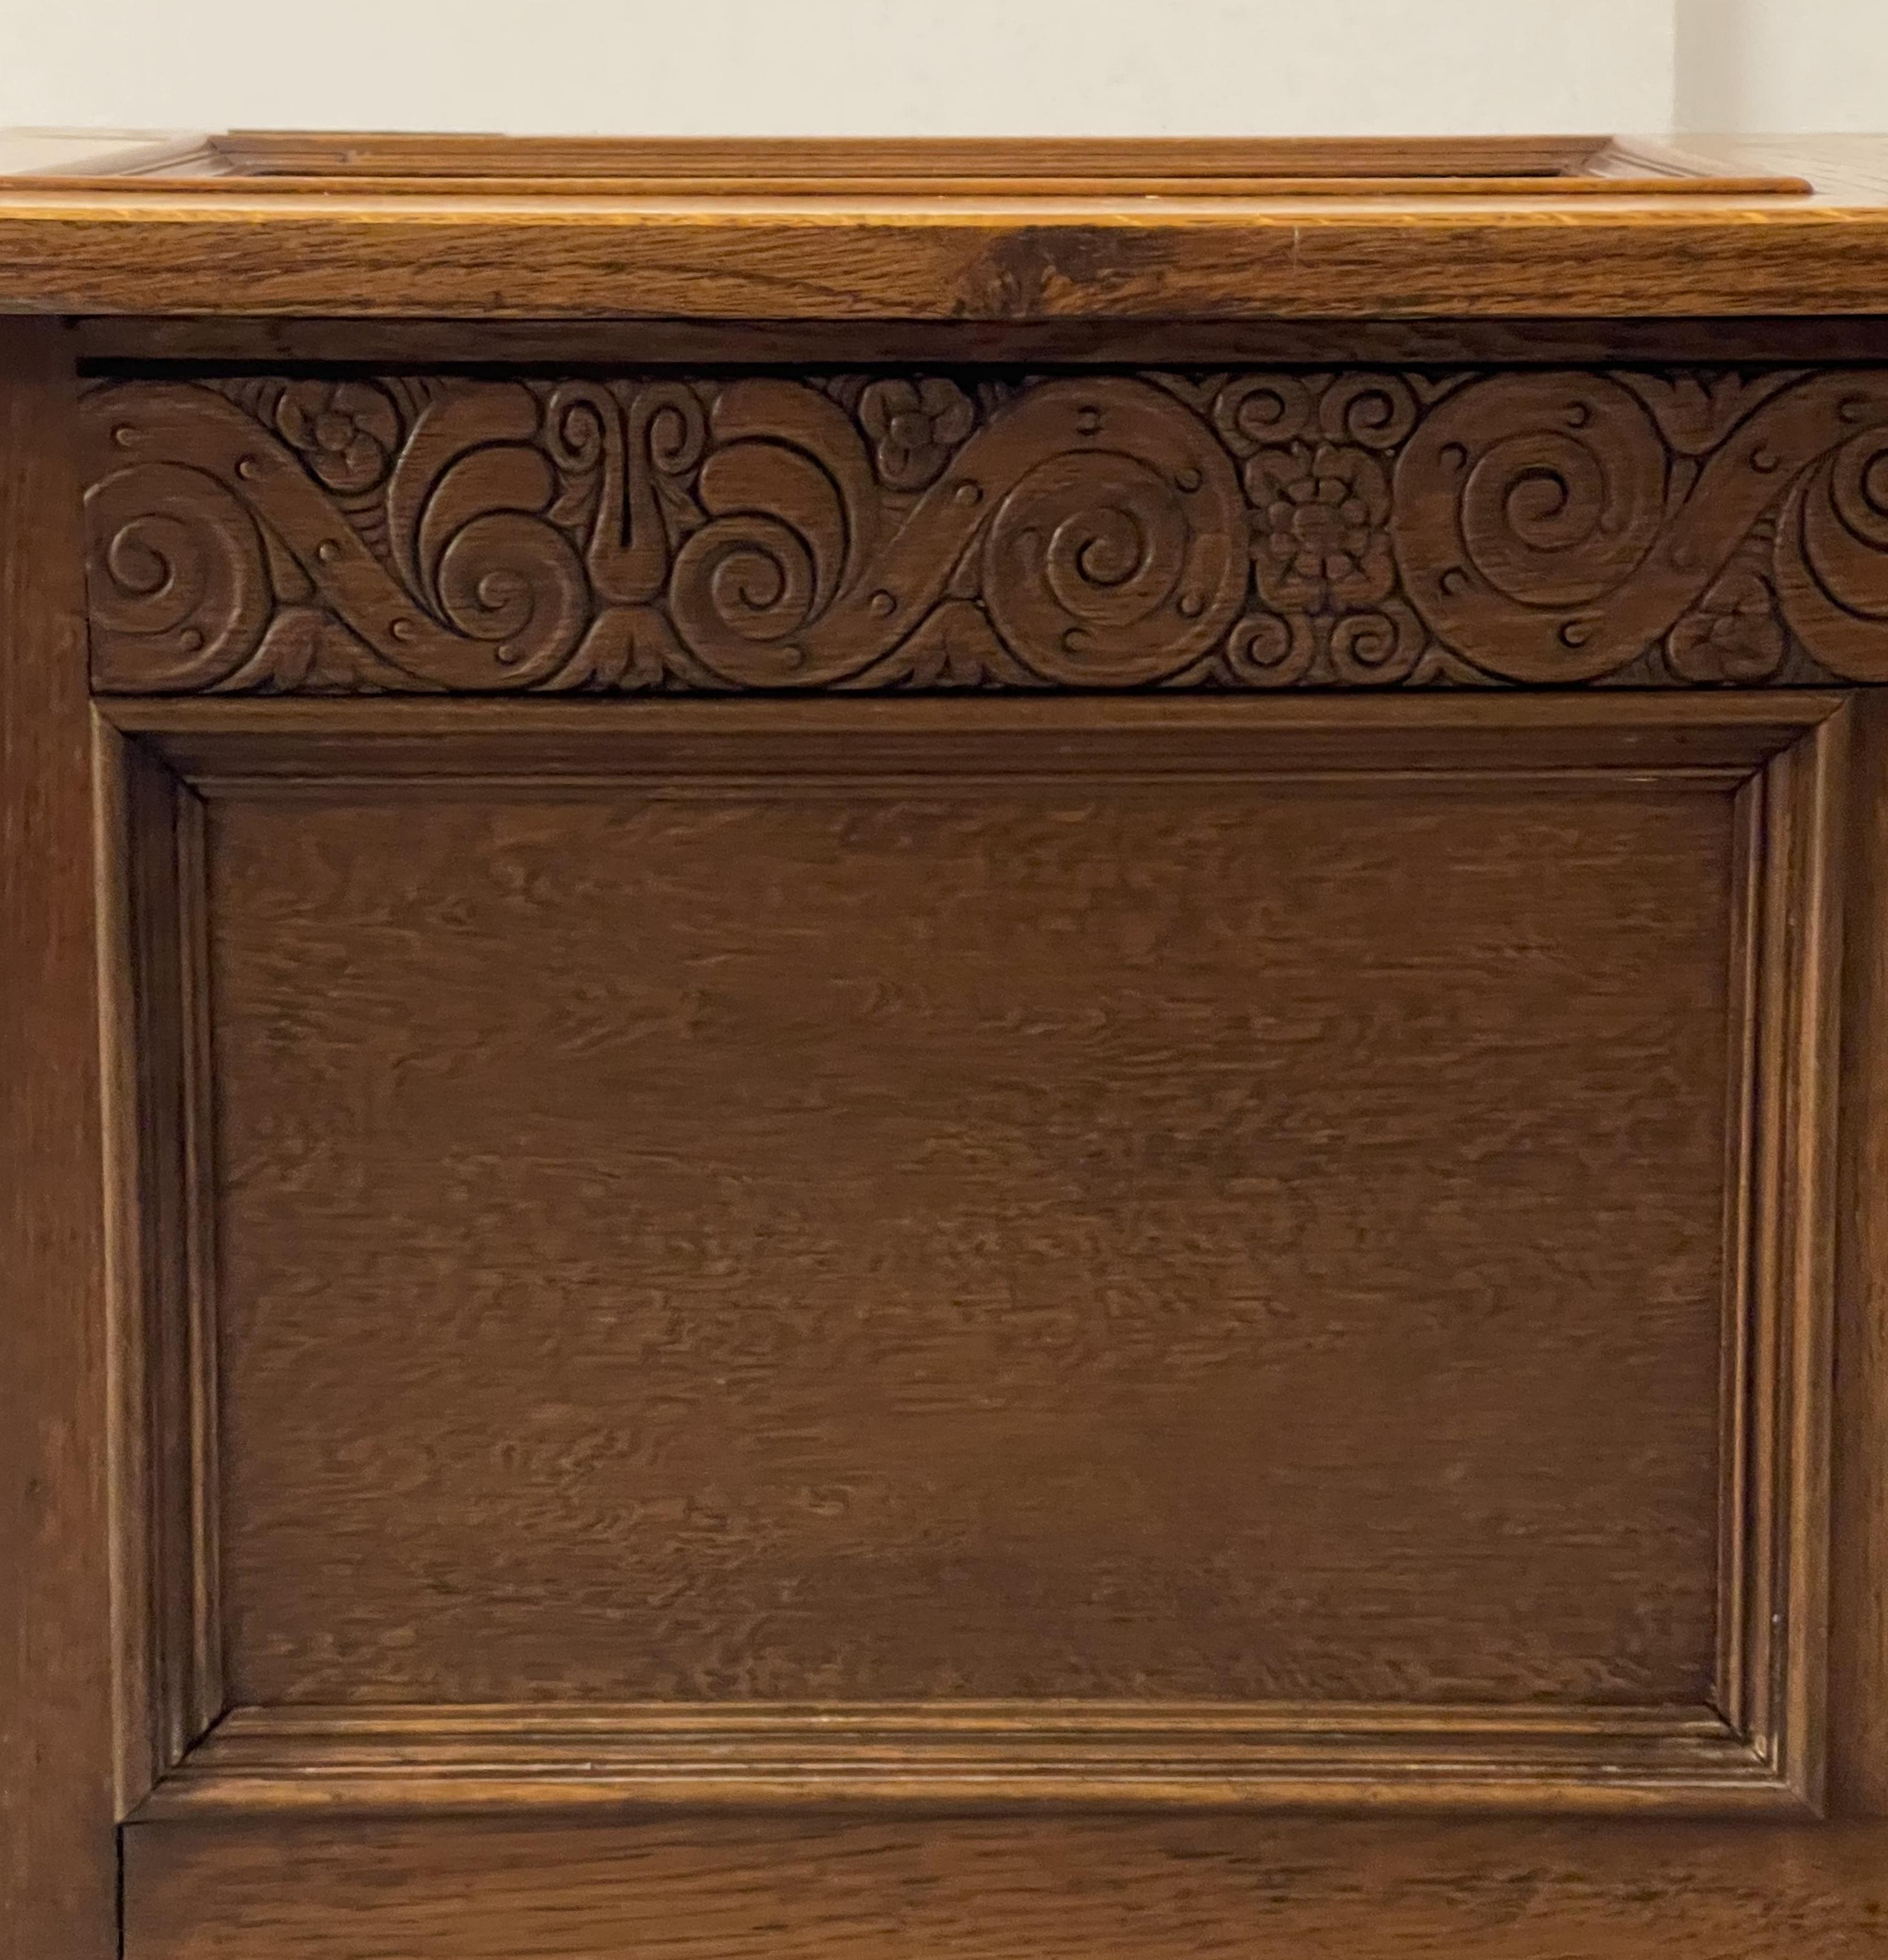 Early 20th Century Oak Blanket Chest Trunk With Scroll Carved Detailing For Sale 4